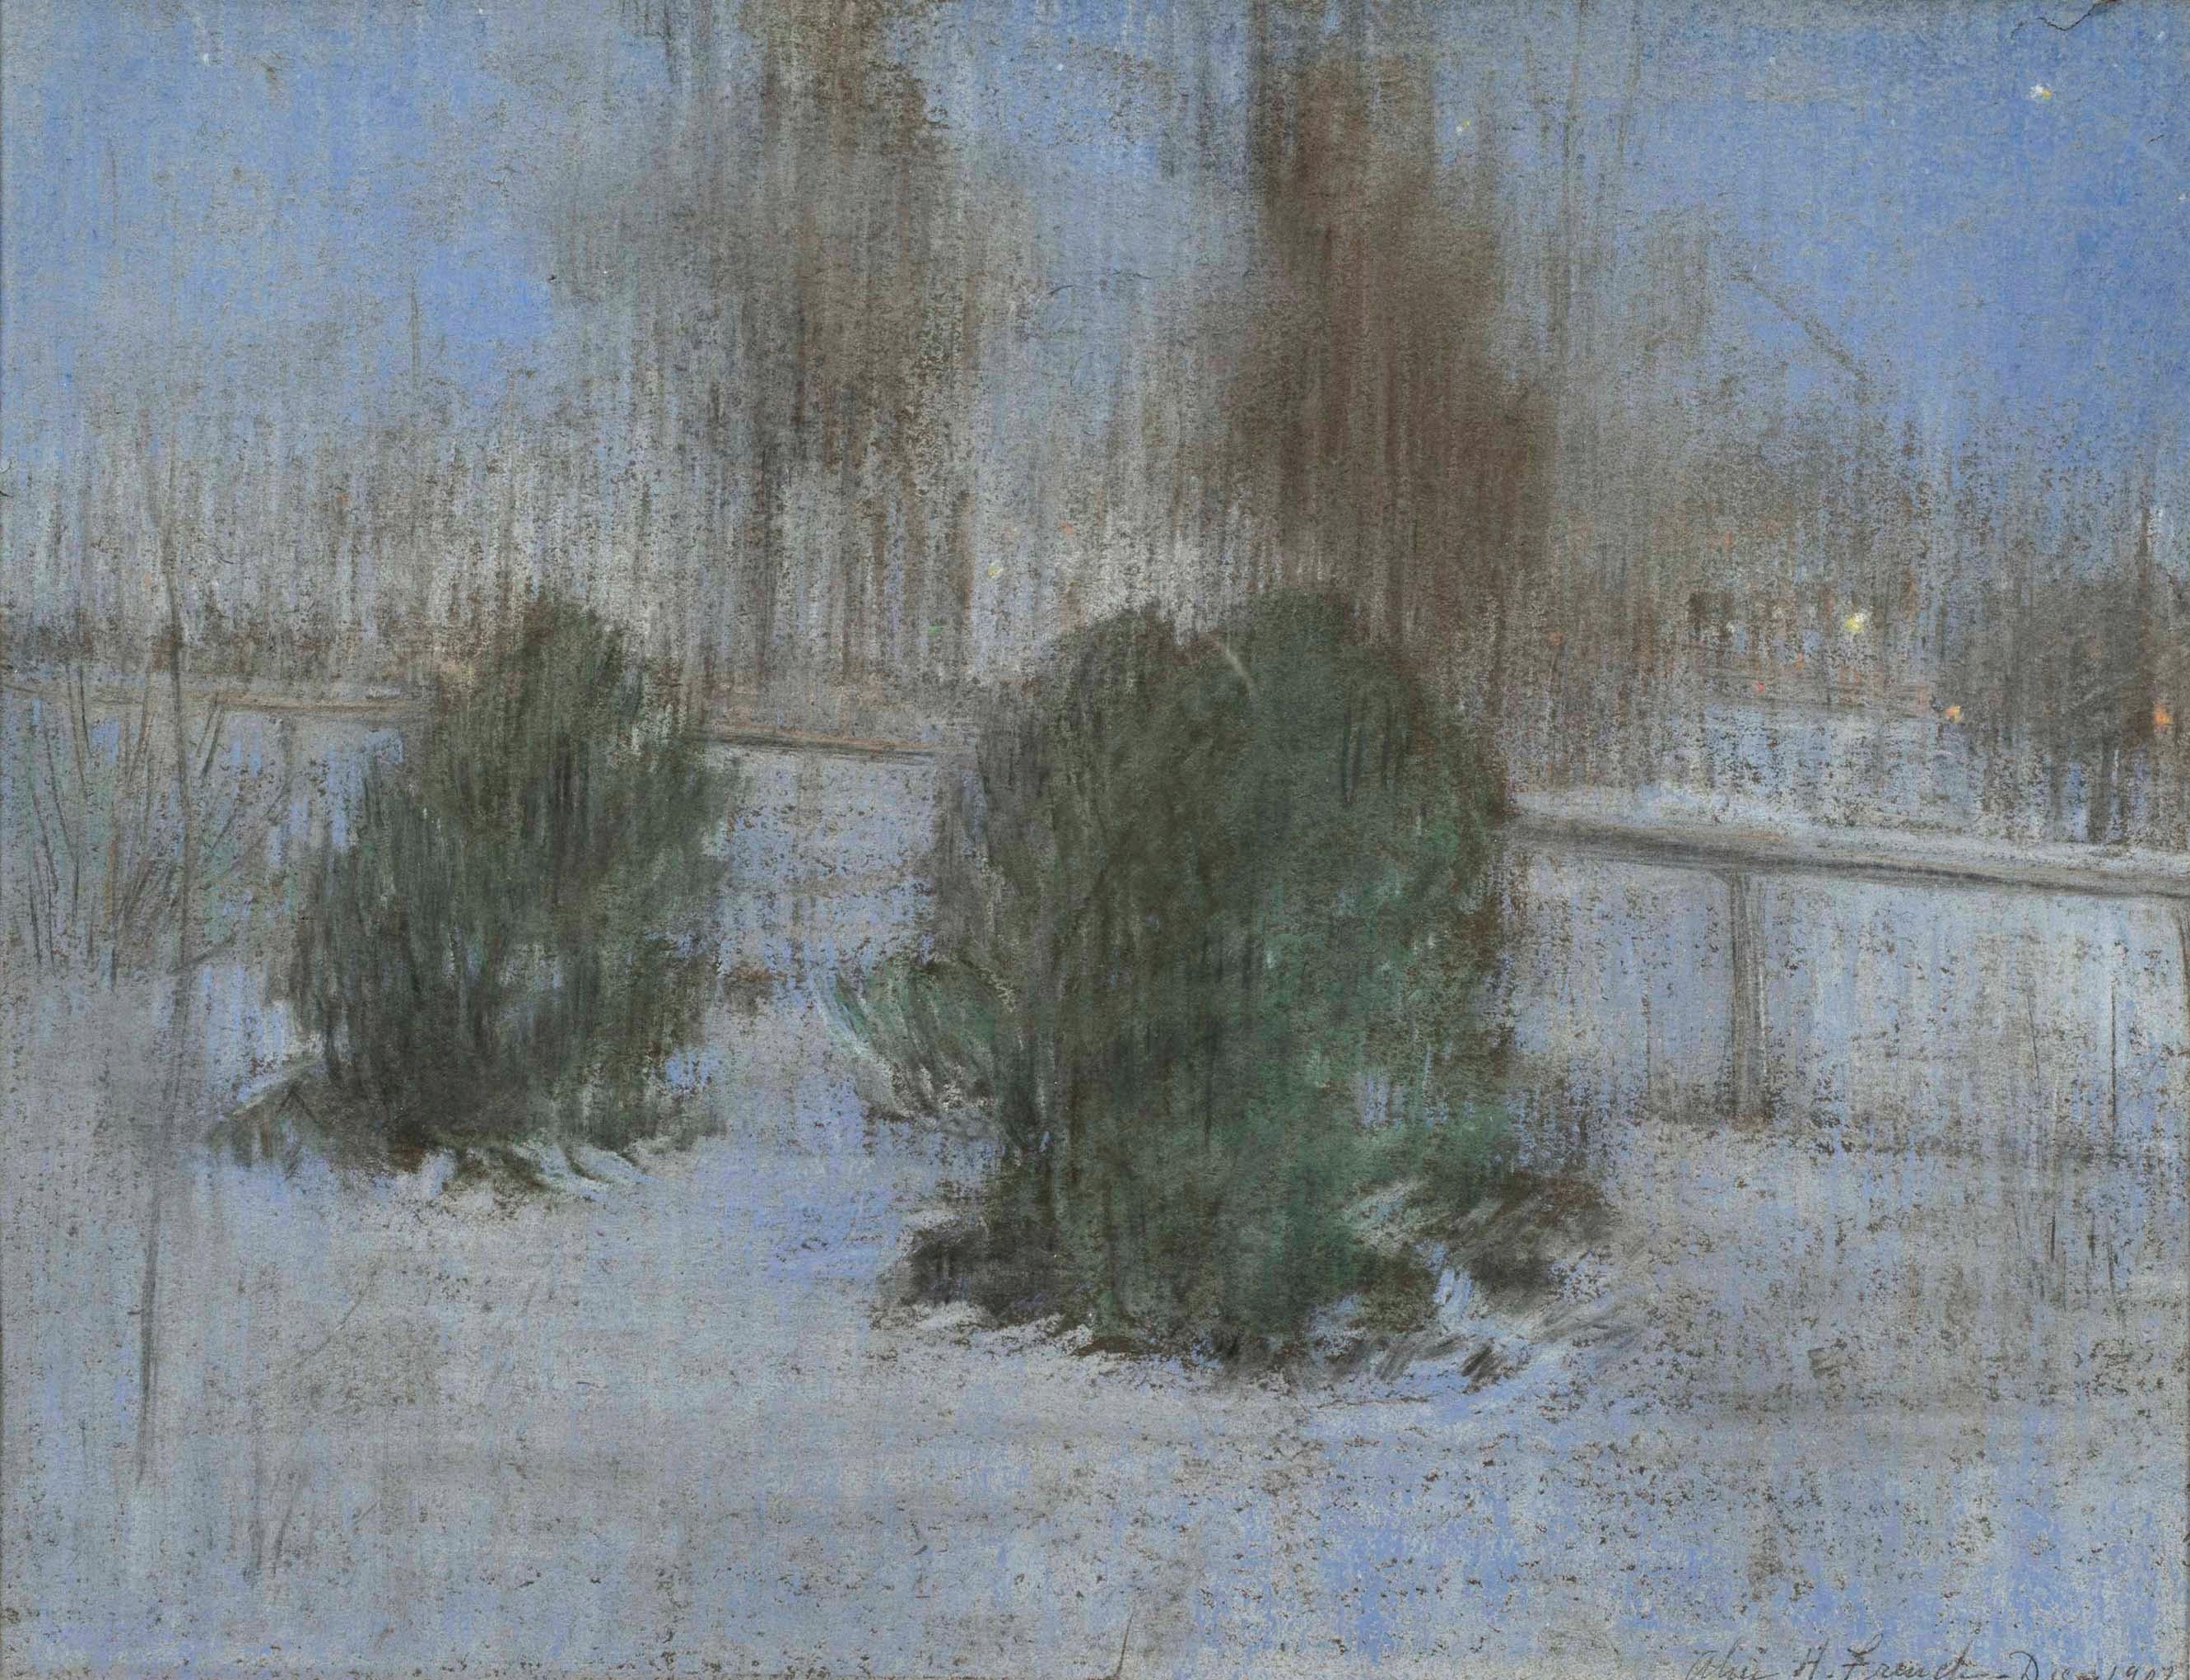 Evening Snow Scene by Alice Helm French (1864-c.1953, American)

Alice Helm French (1864-c.1953)
Evening Snow Scene
Pastel on paper
9 1/2 x 12 inches (Sight Size)
Signed and dated Dec 1902, lower right